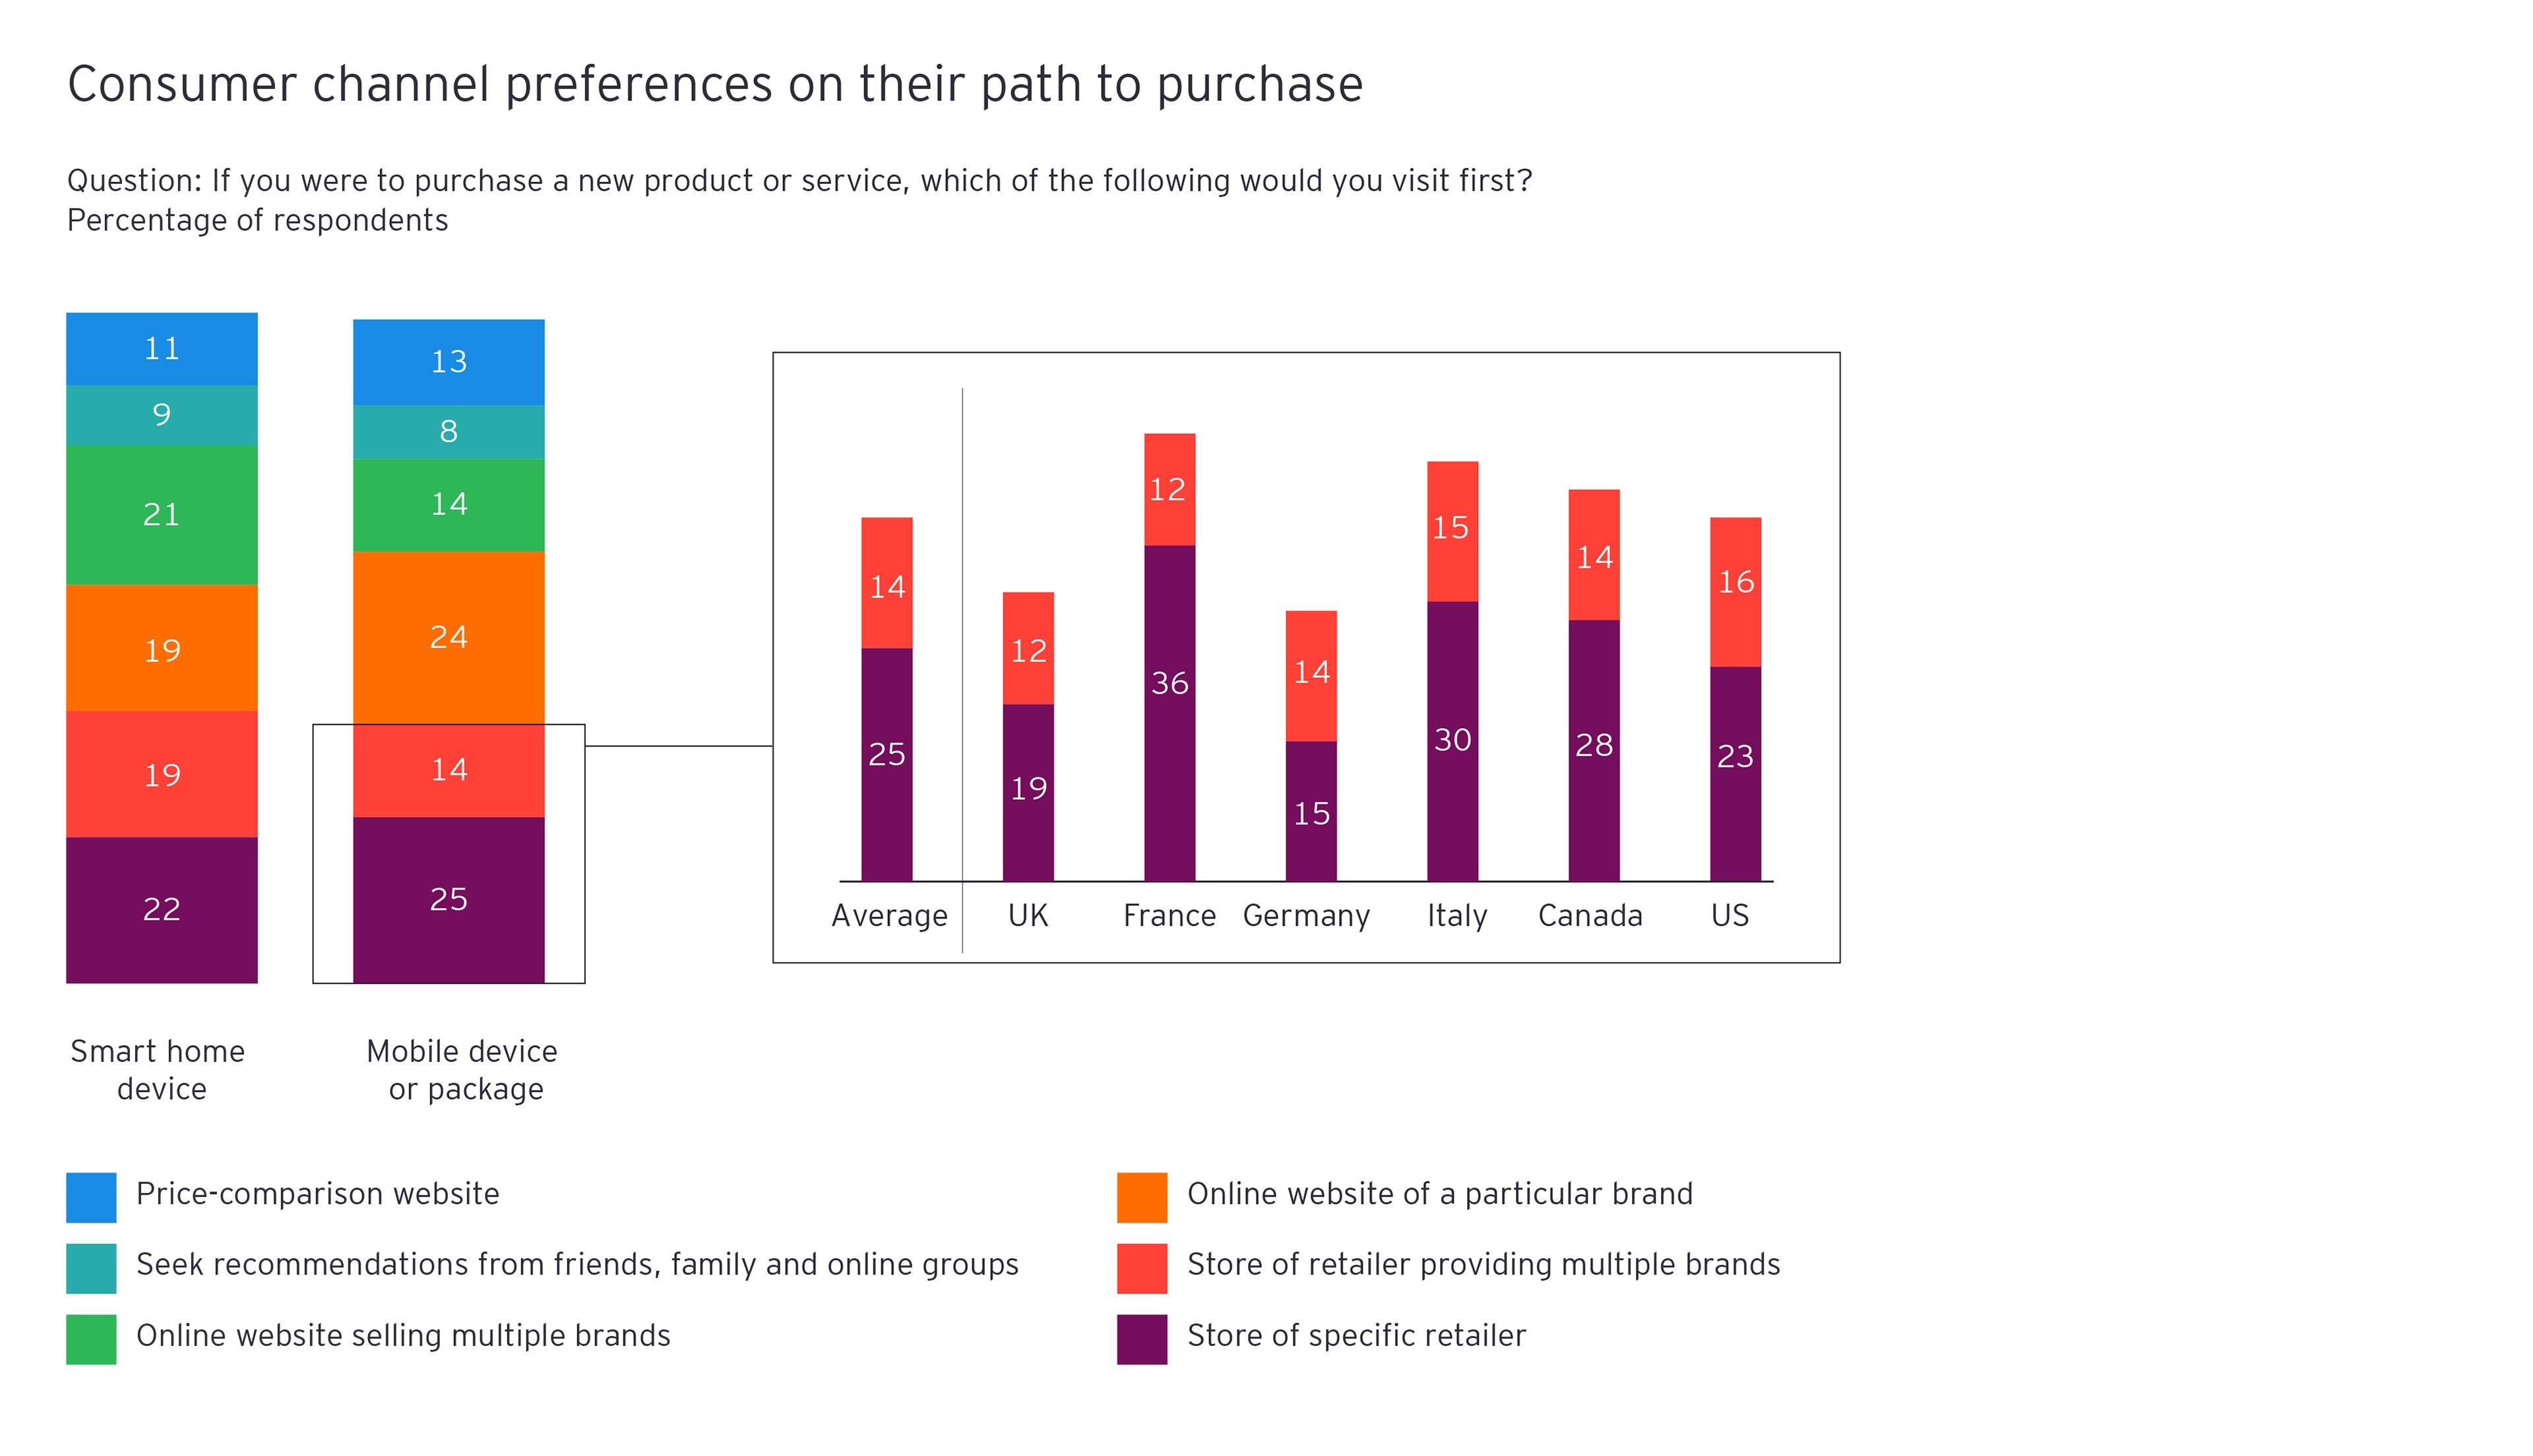 Figure 3: Consumer channel preferences on their path to purchase